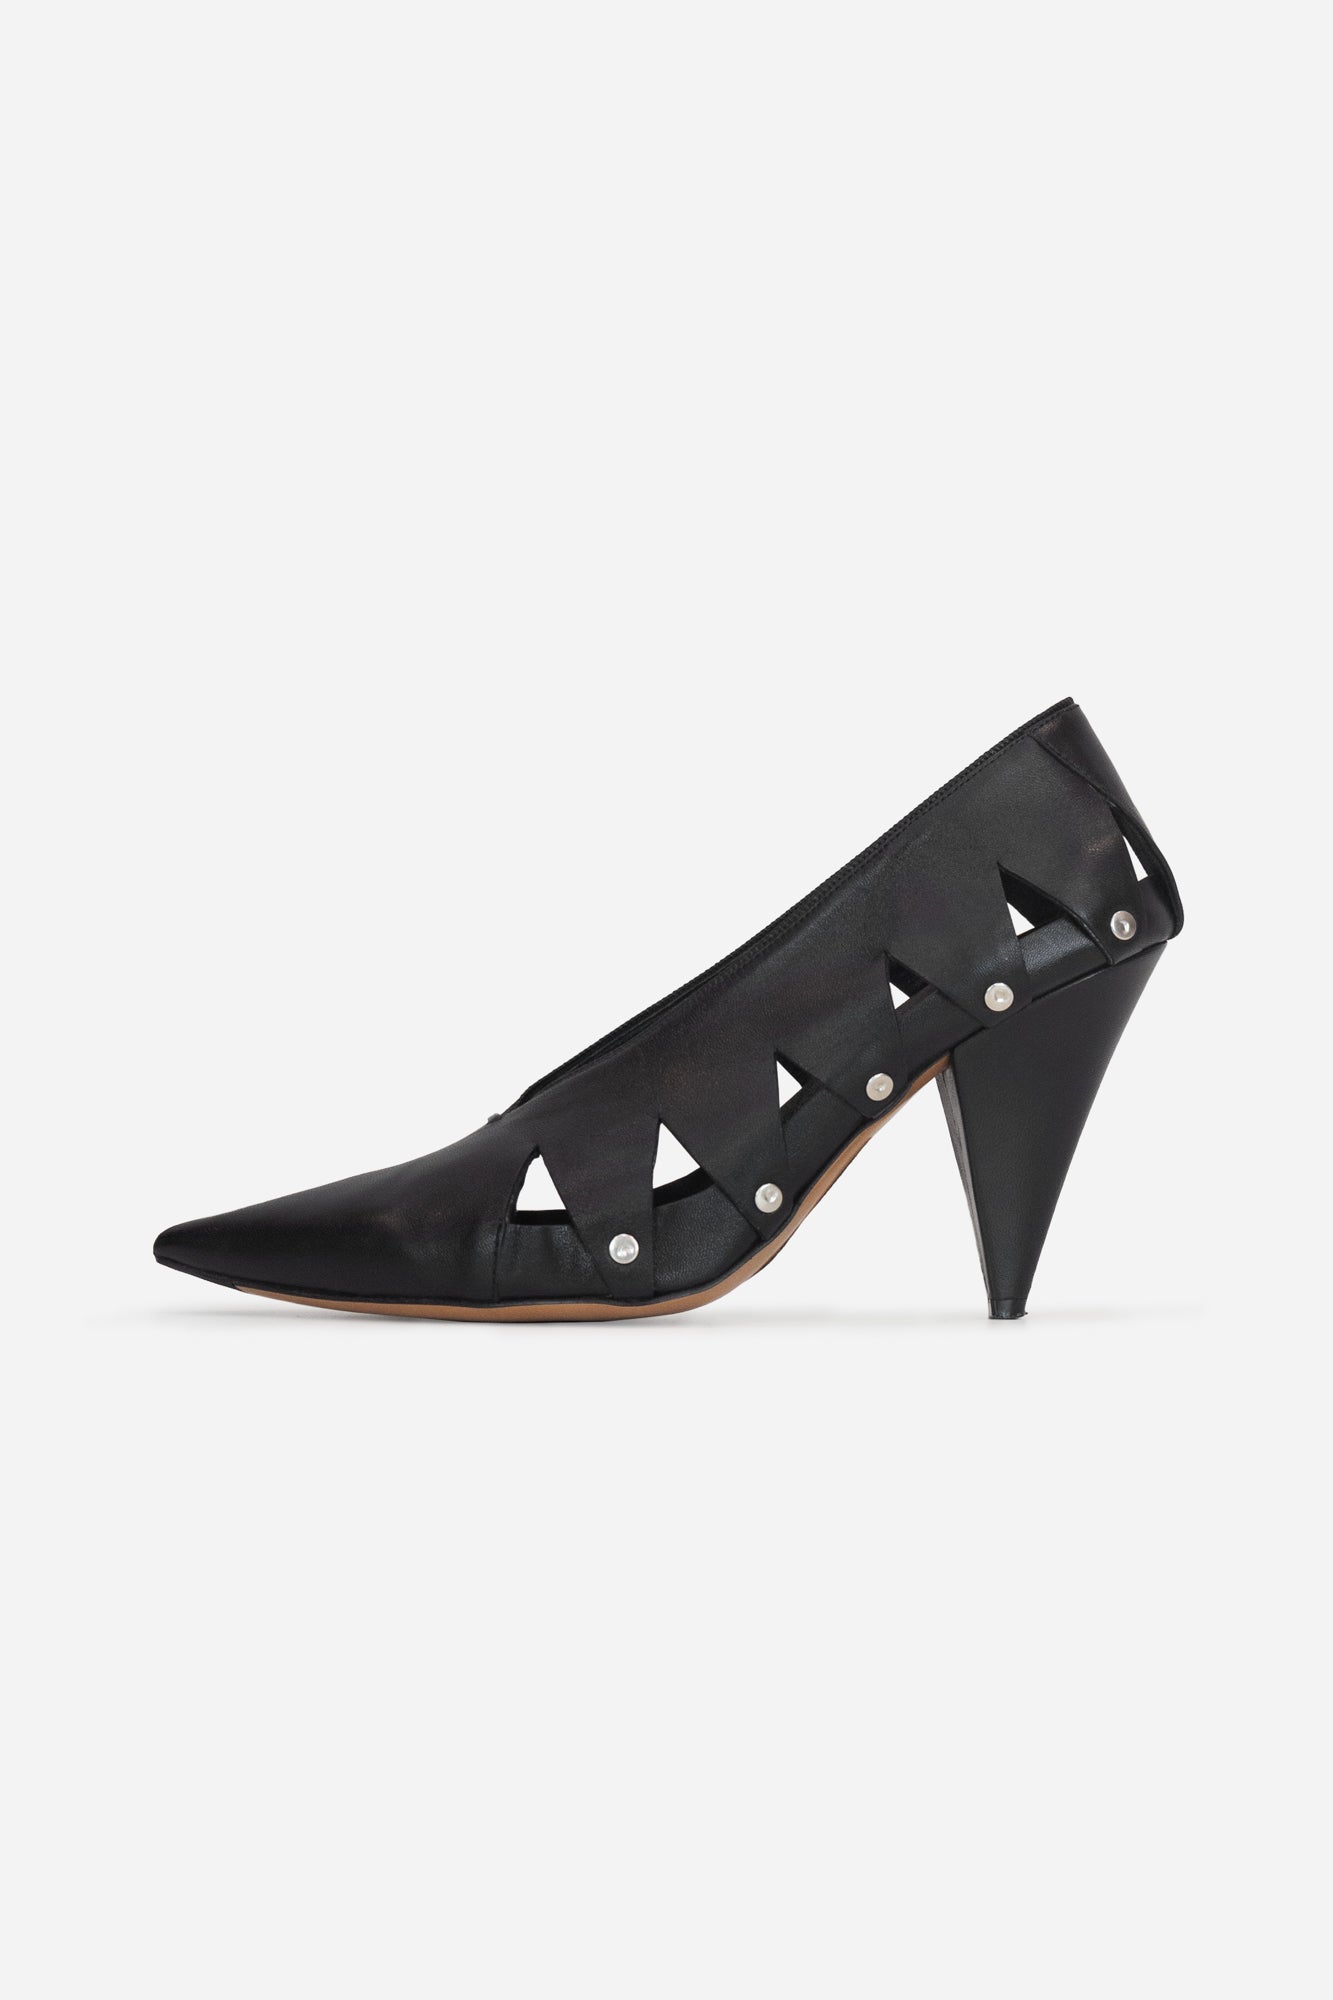 Black Pointed Toe Cut Out Pumps